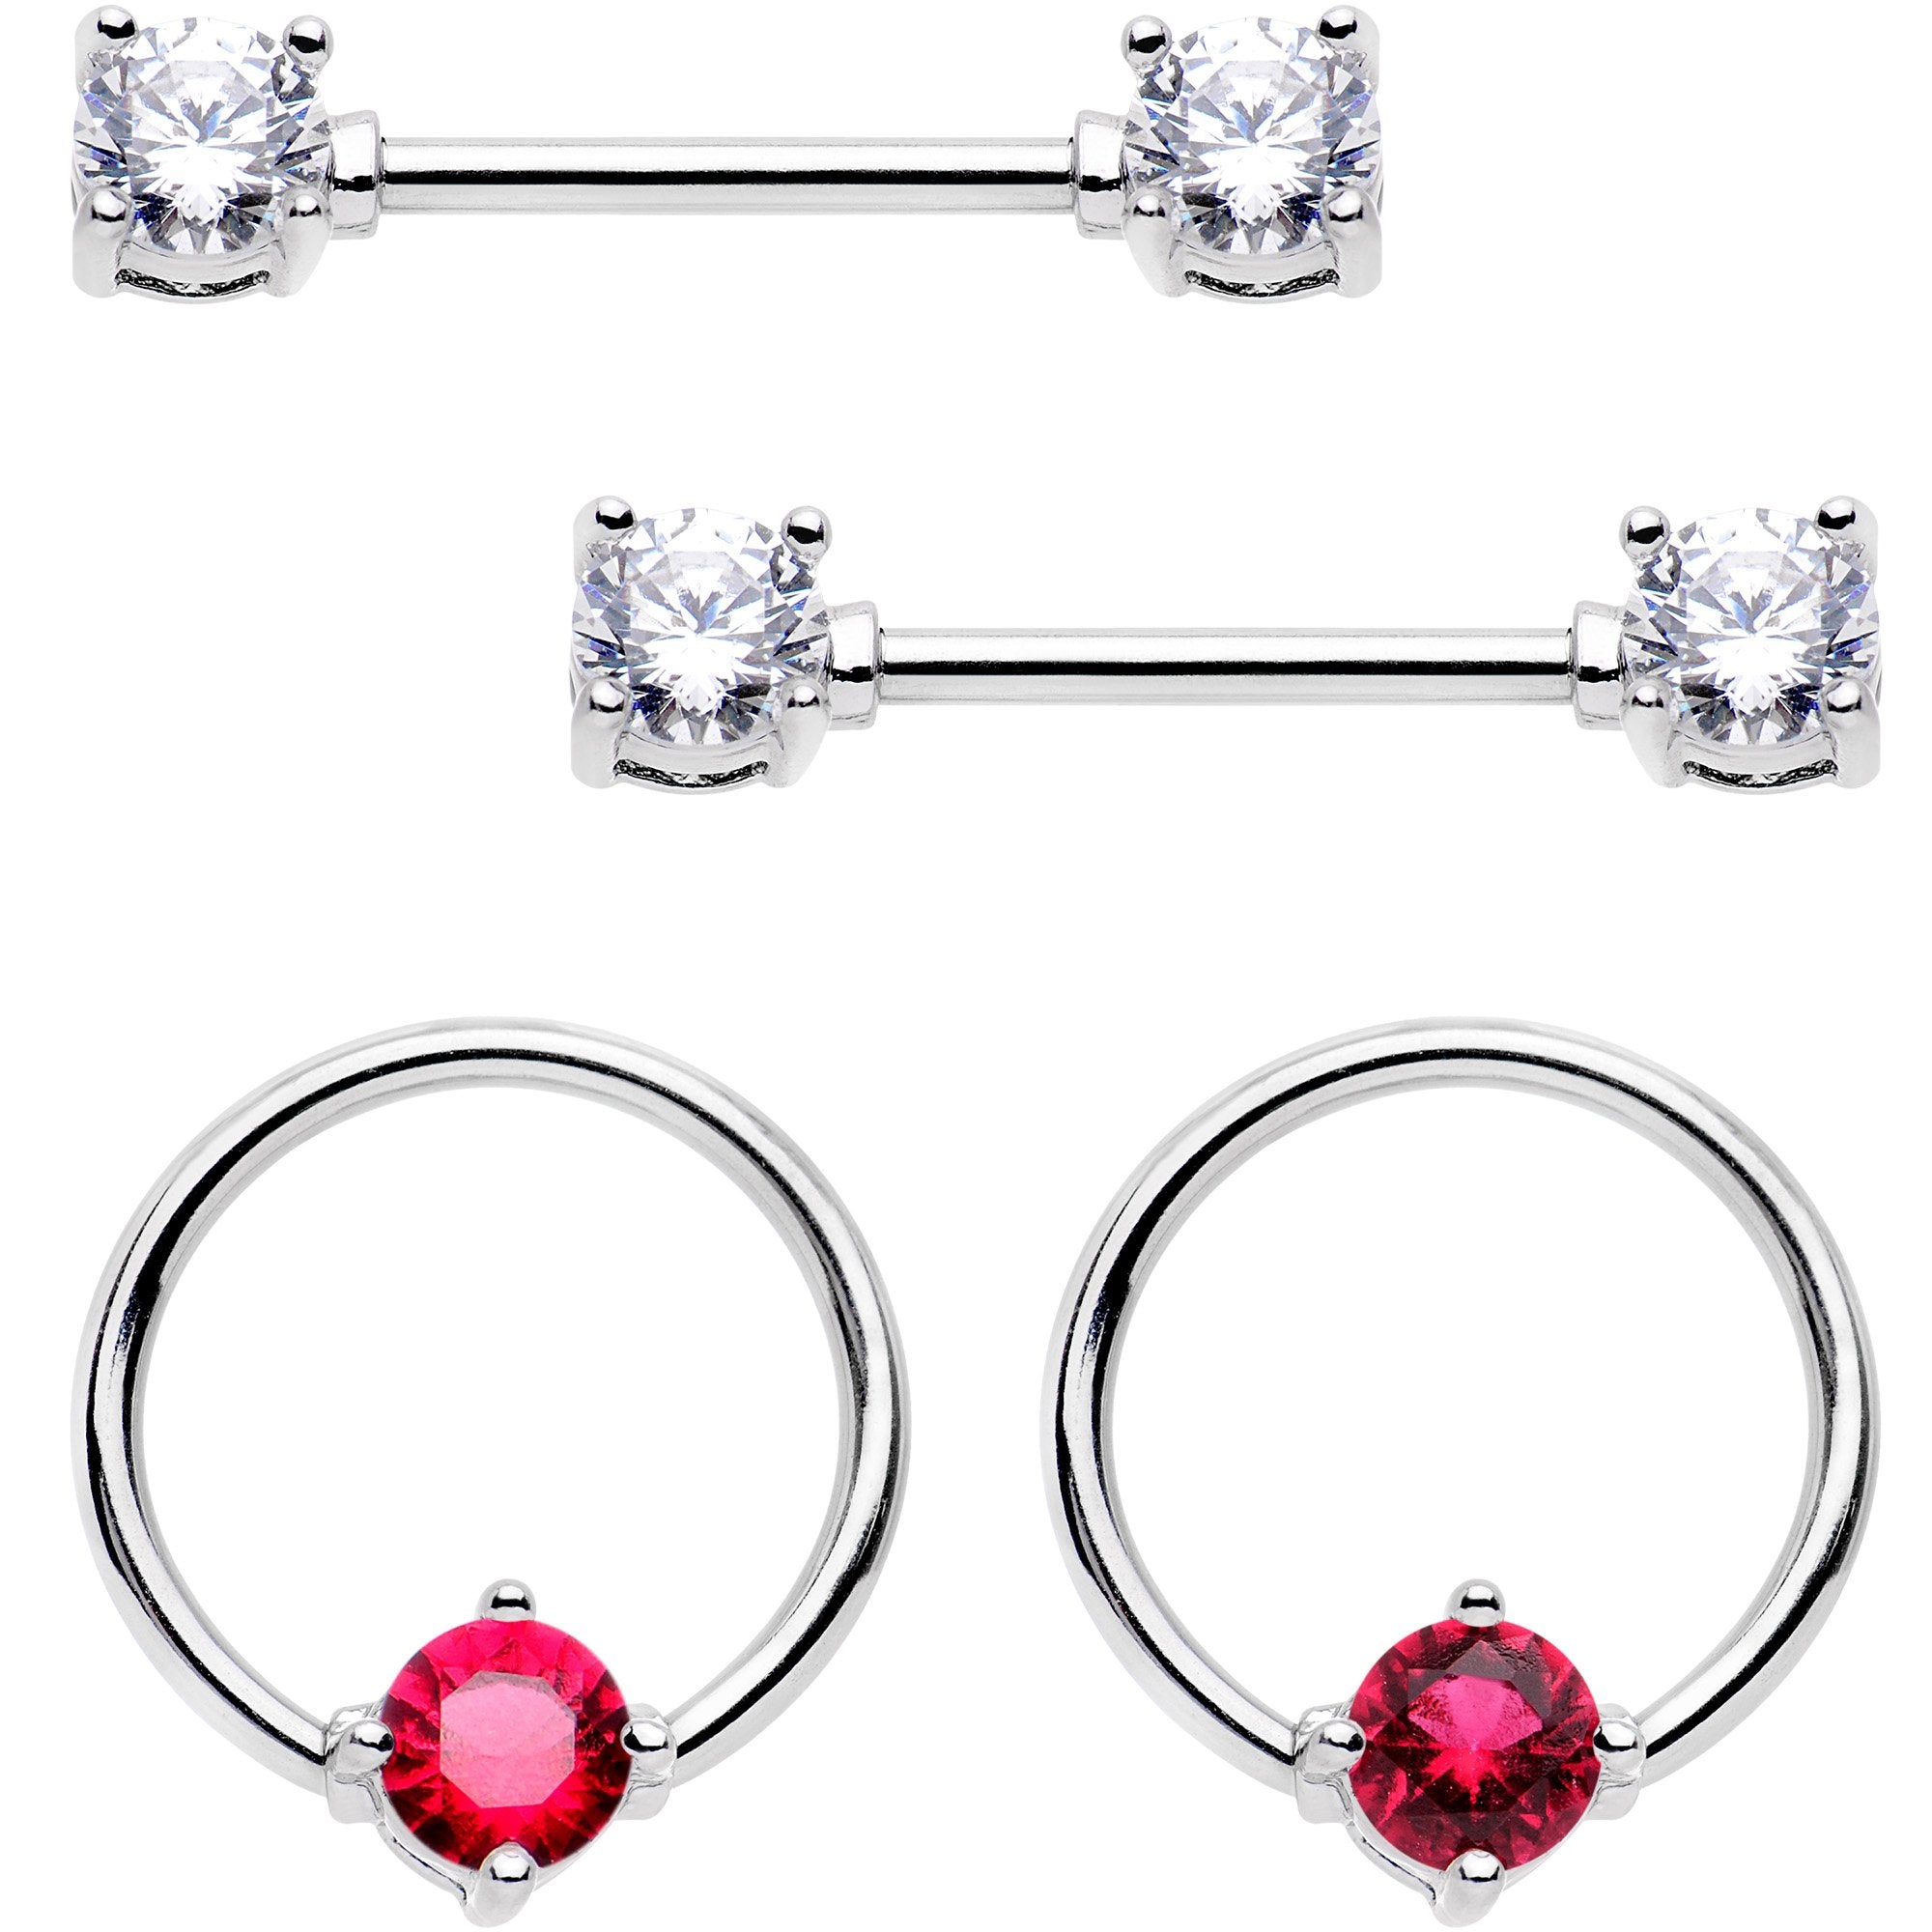 5/8 Clear Pink Gem Captive Ring Straight Barbell Nipple Ring Set